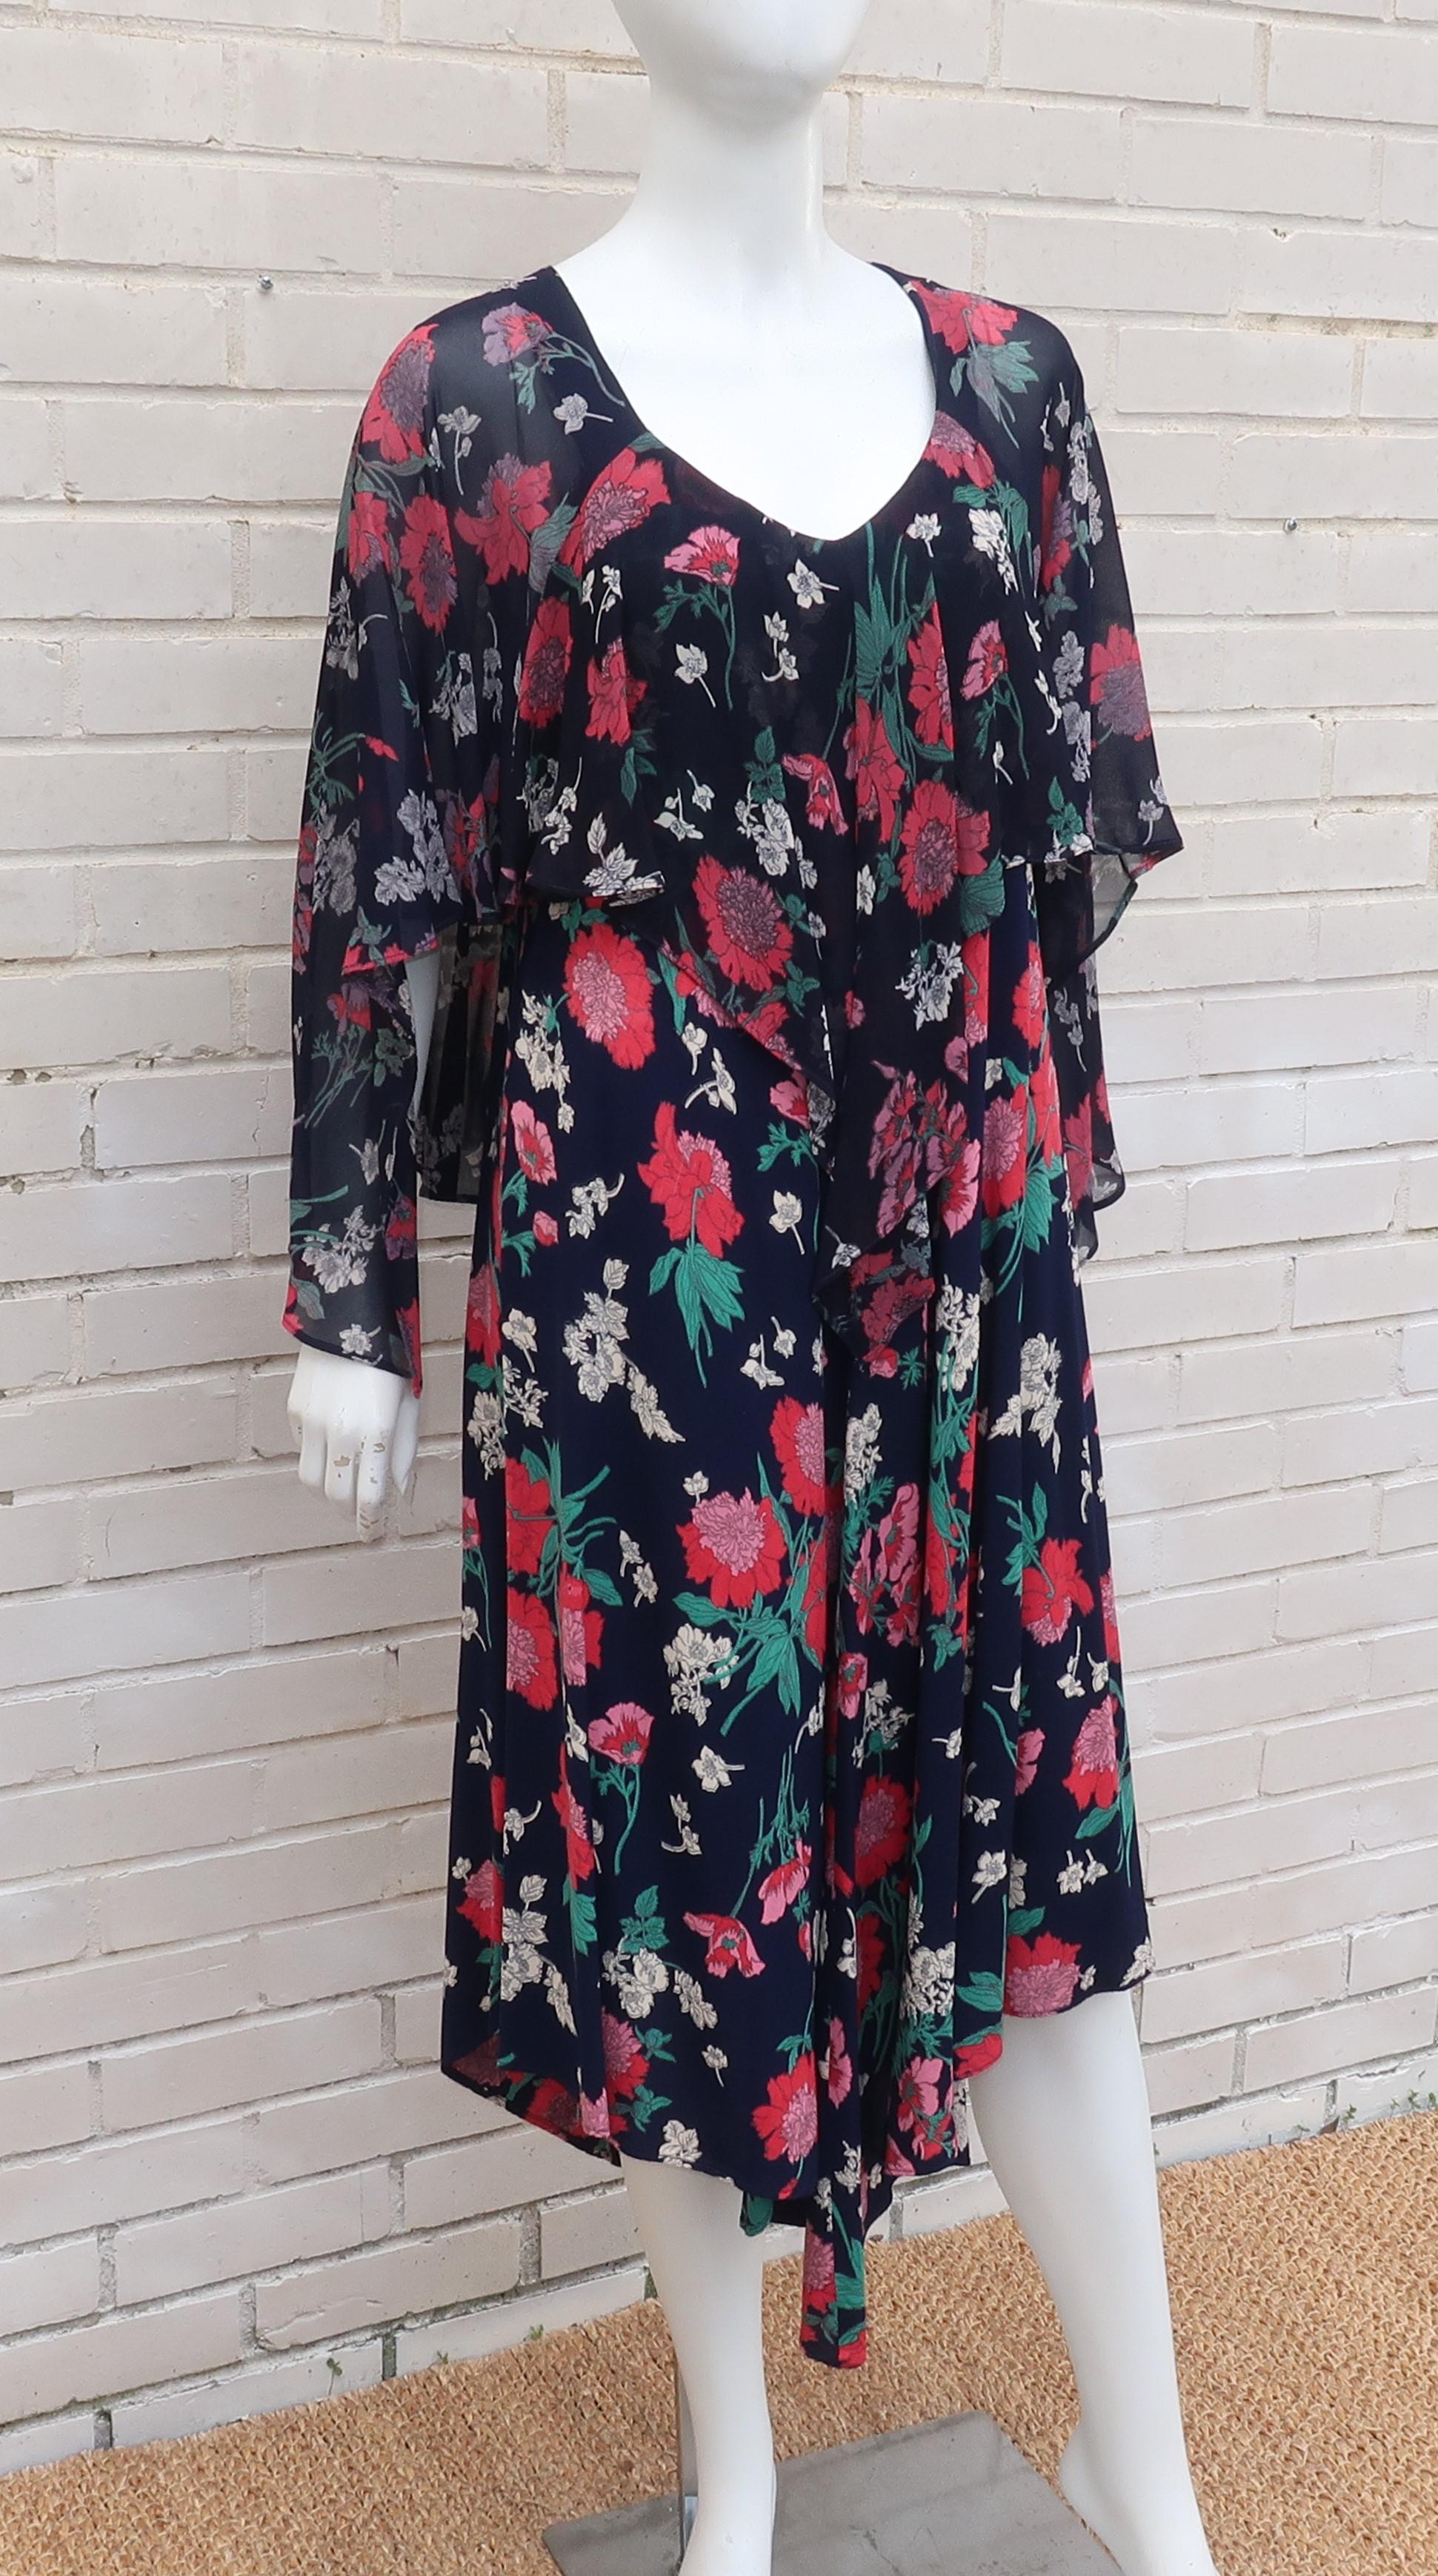 Women's Early Nicole Miller 1970's Floral Bohemian Dress With Overlay 